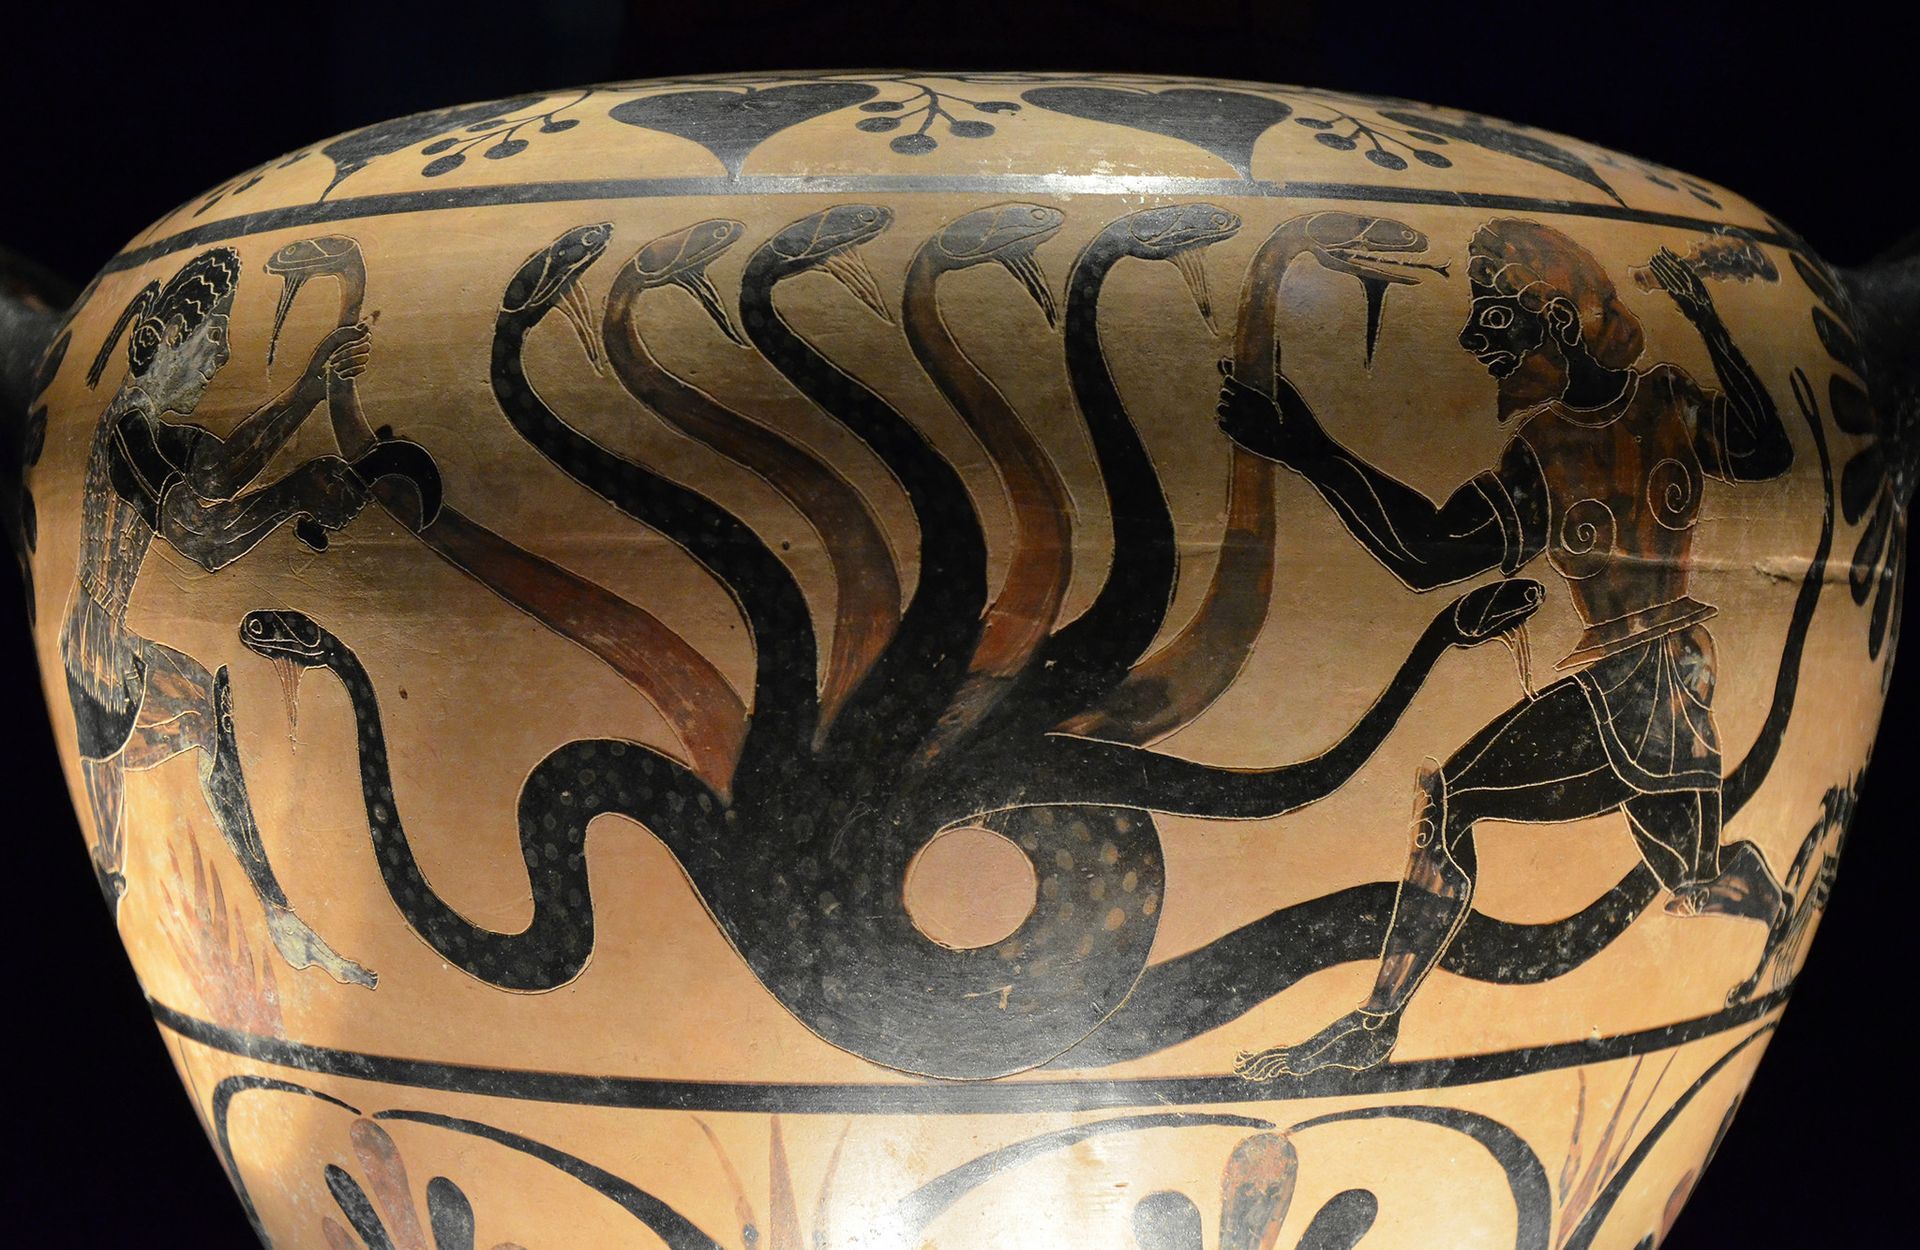 A Greek vase with a snake and a man on it.